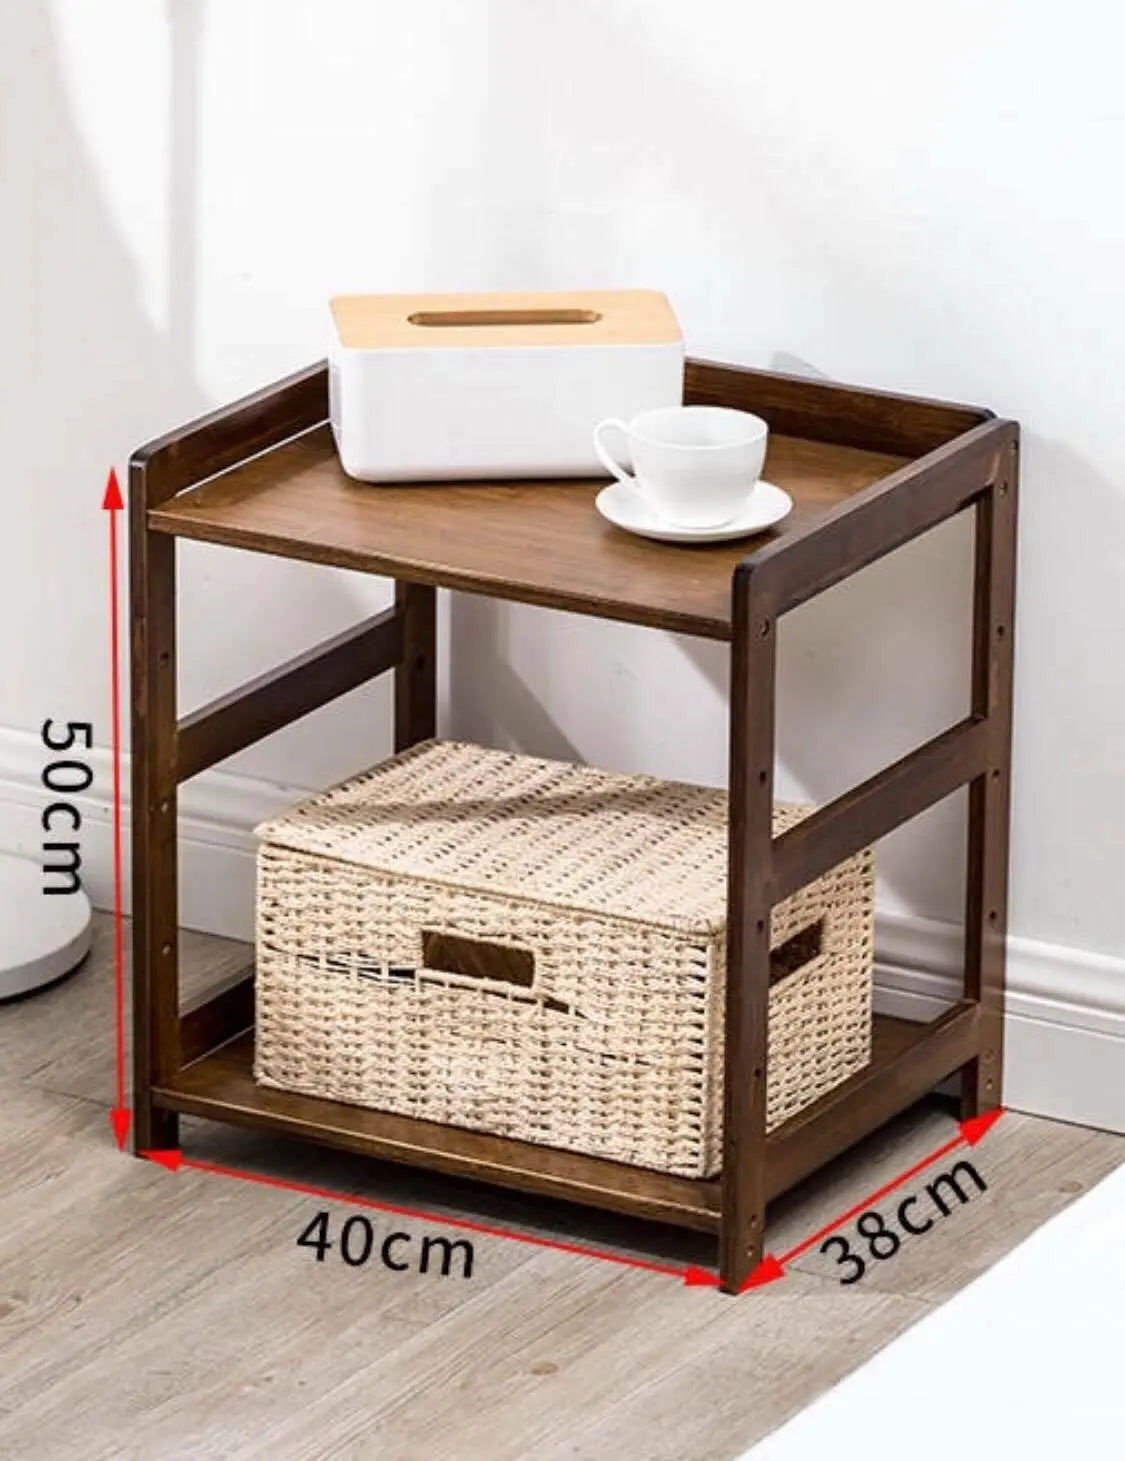 Bamboo Modern Bedside Multiple Shelves Trolley Table With Wheels Cart Rack everythingbamboo